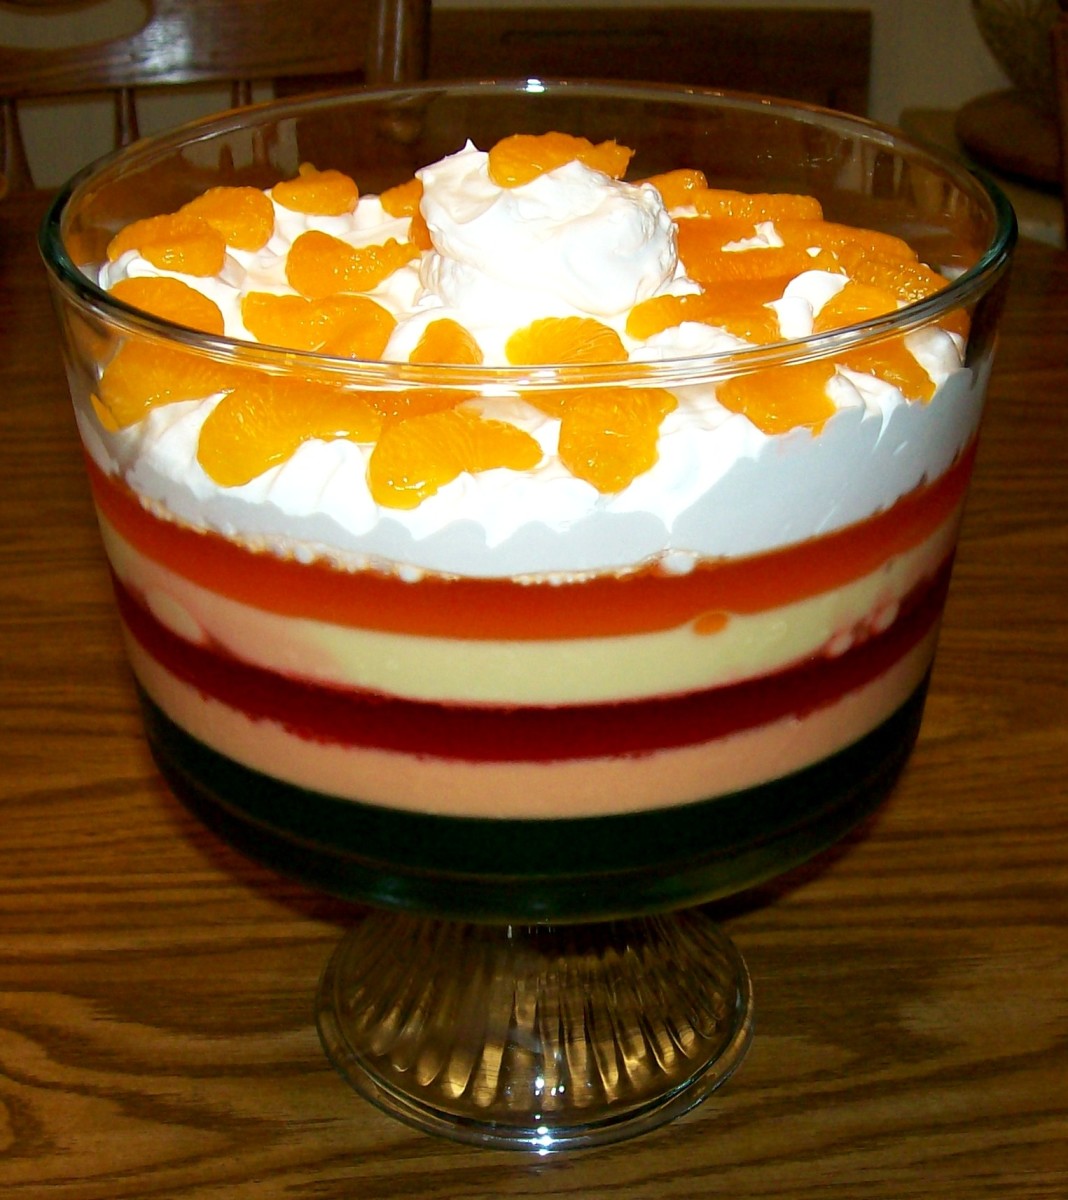 A trifle looks good from all angles!